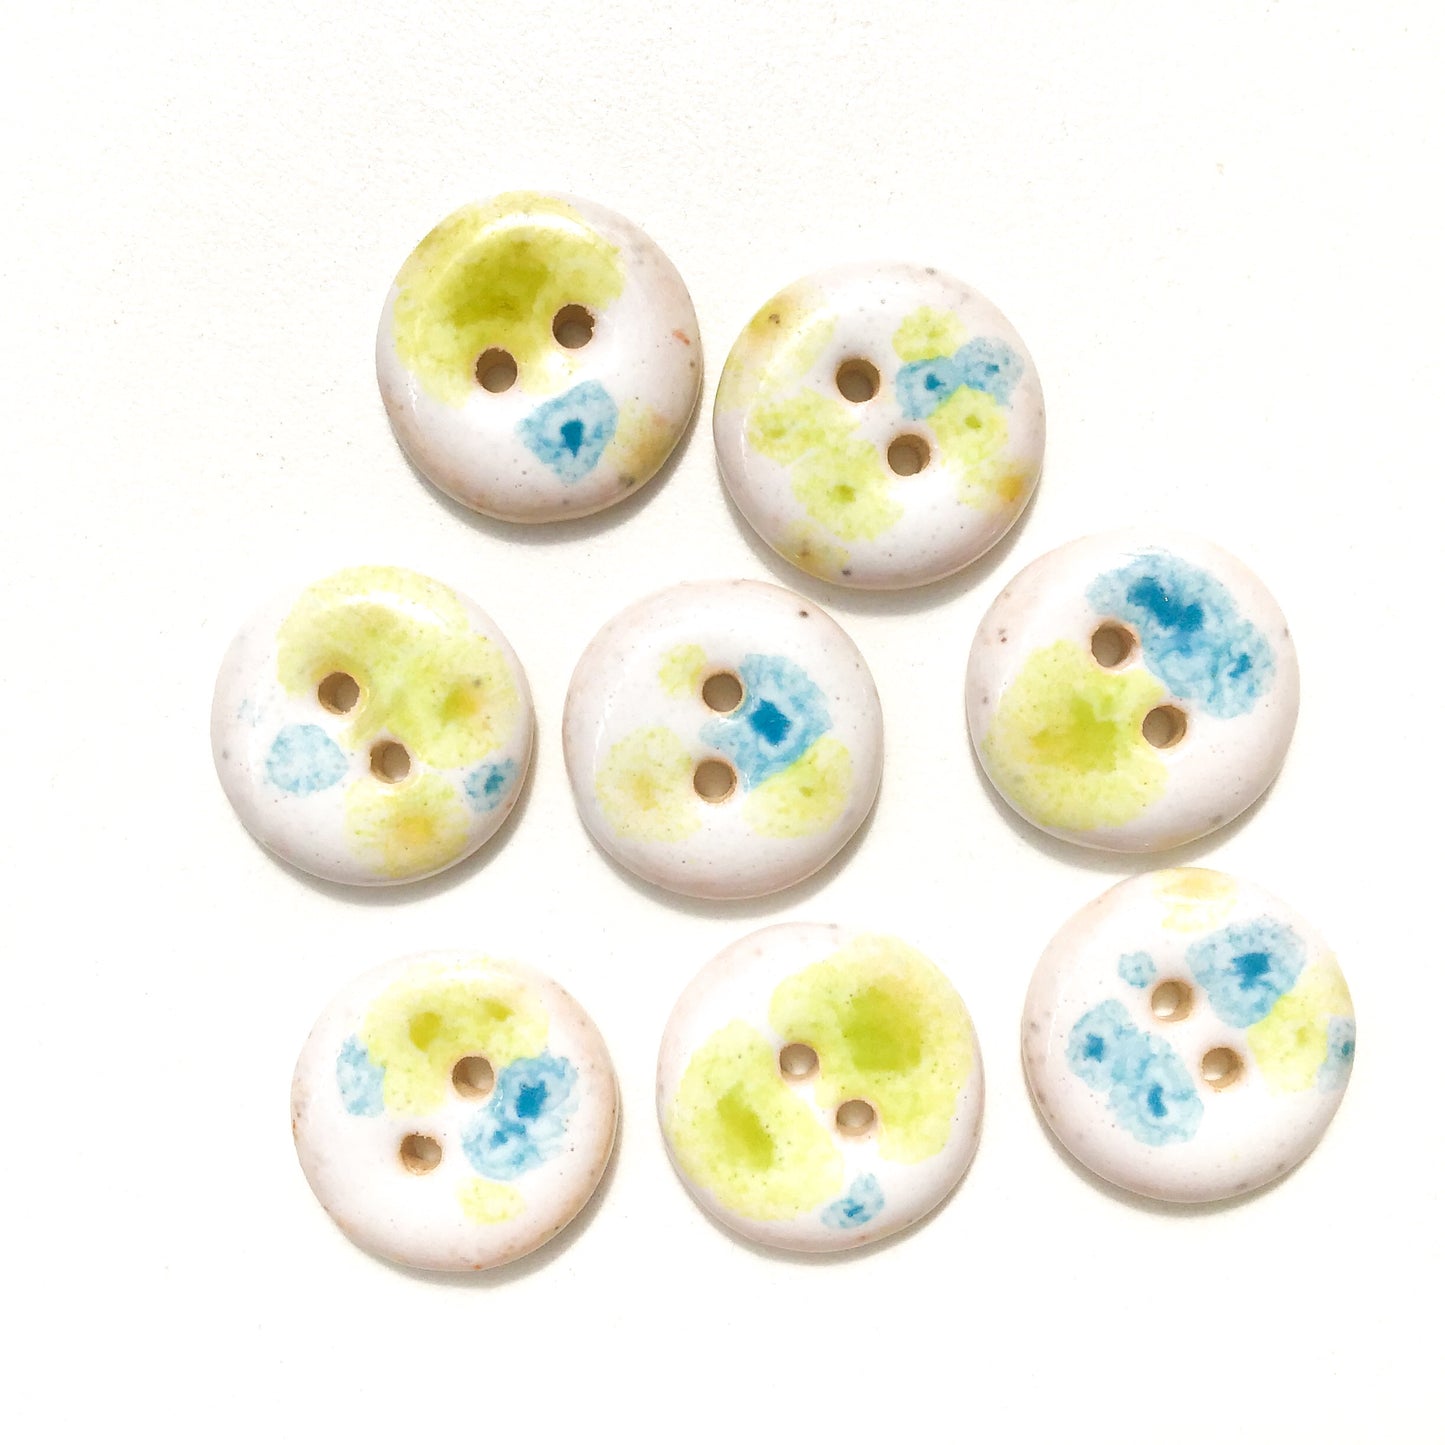 Apple Green & Blue Ceramic Buttons on White - 3/4" - 8 Pack